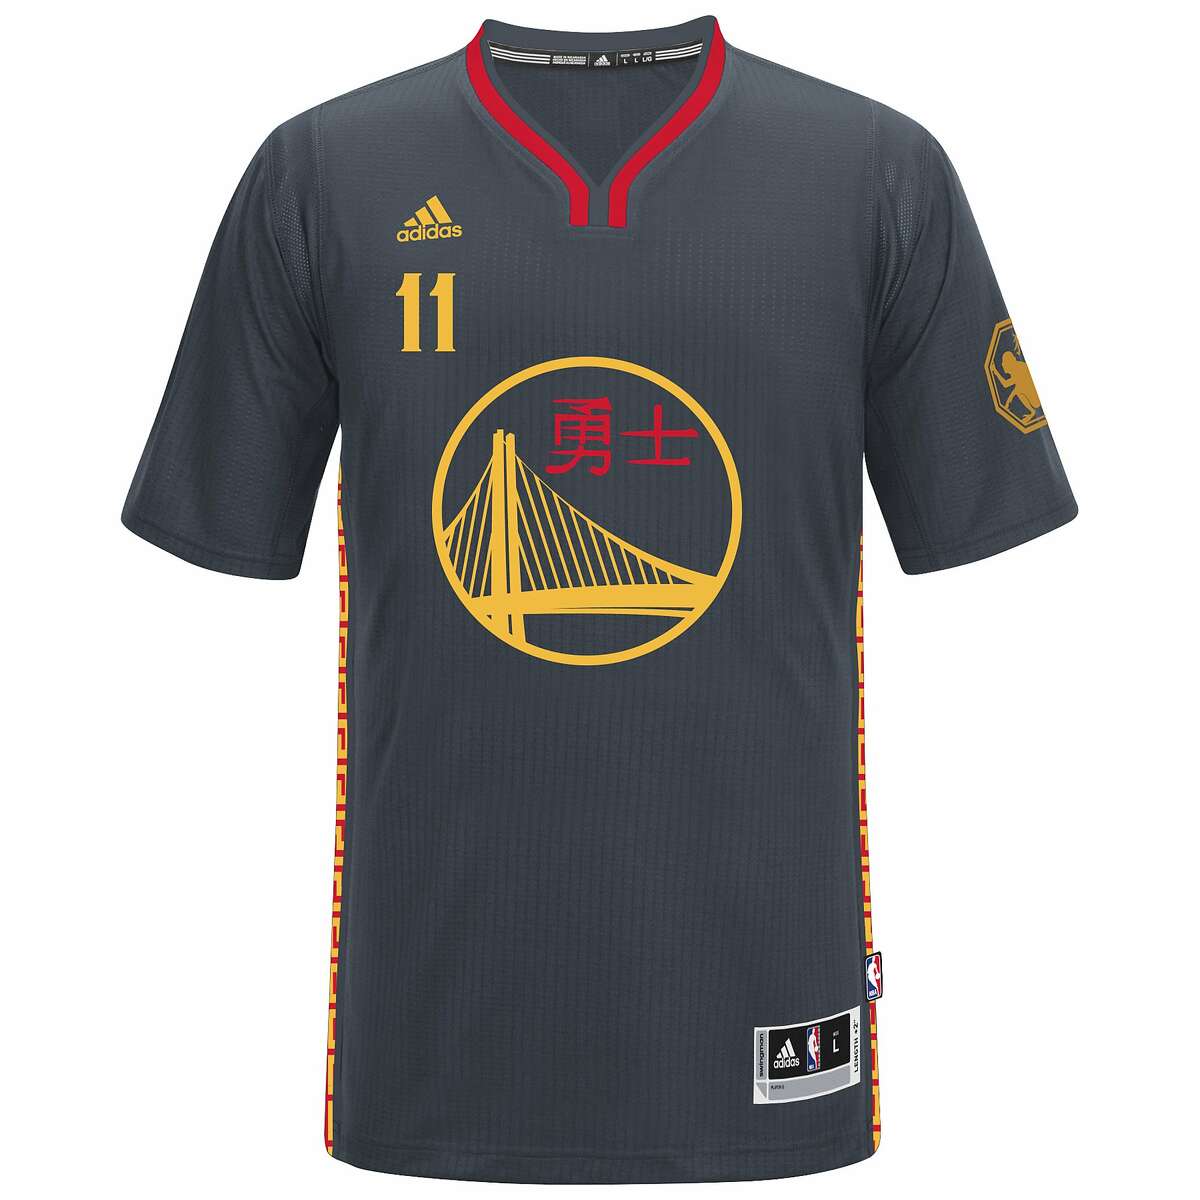 golden state warriors chinese jersey